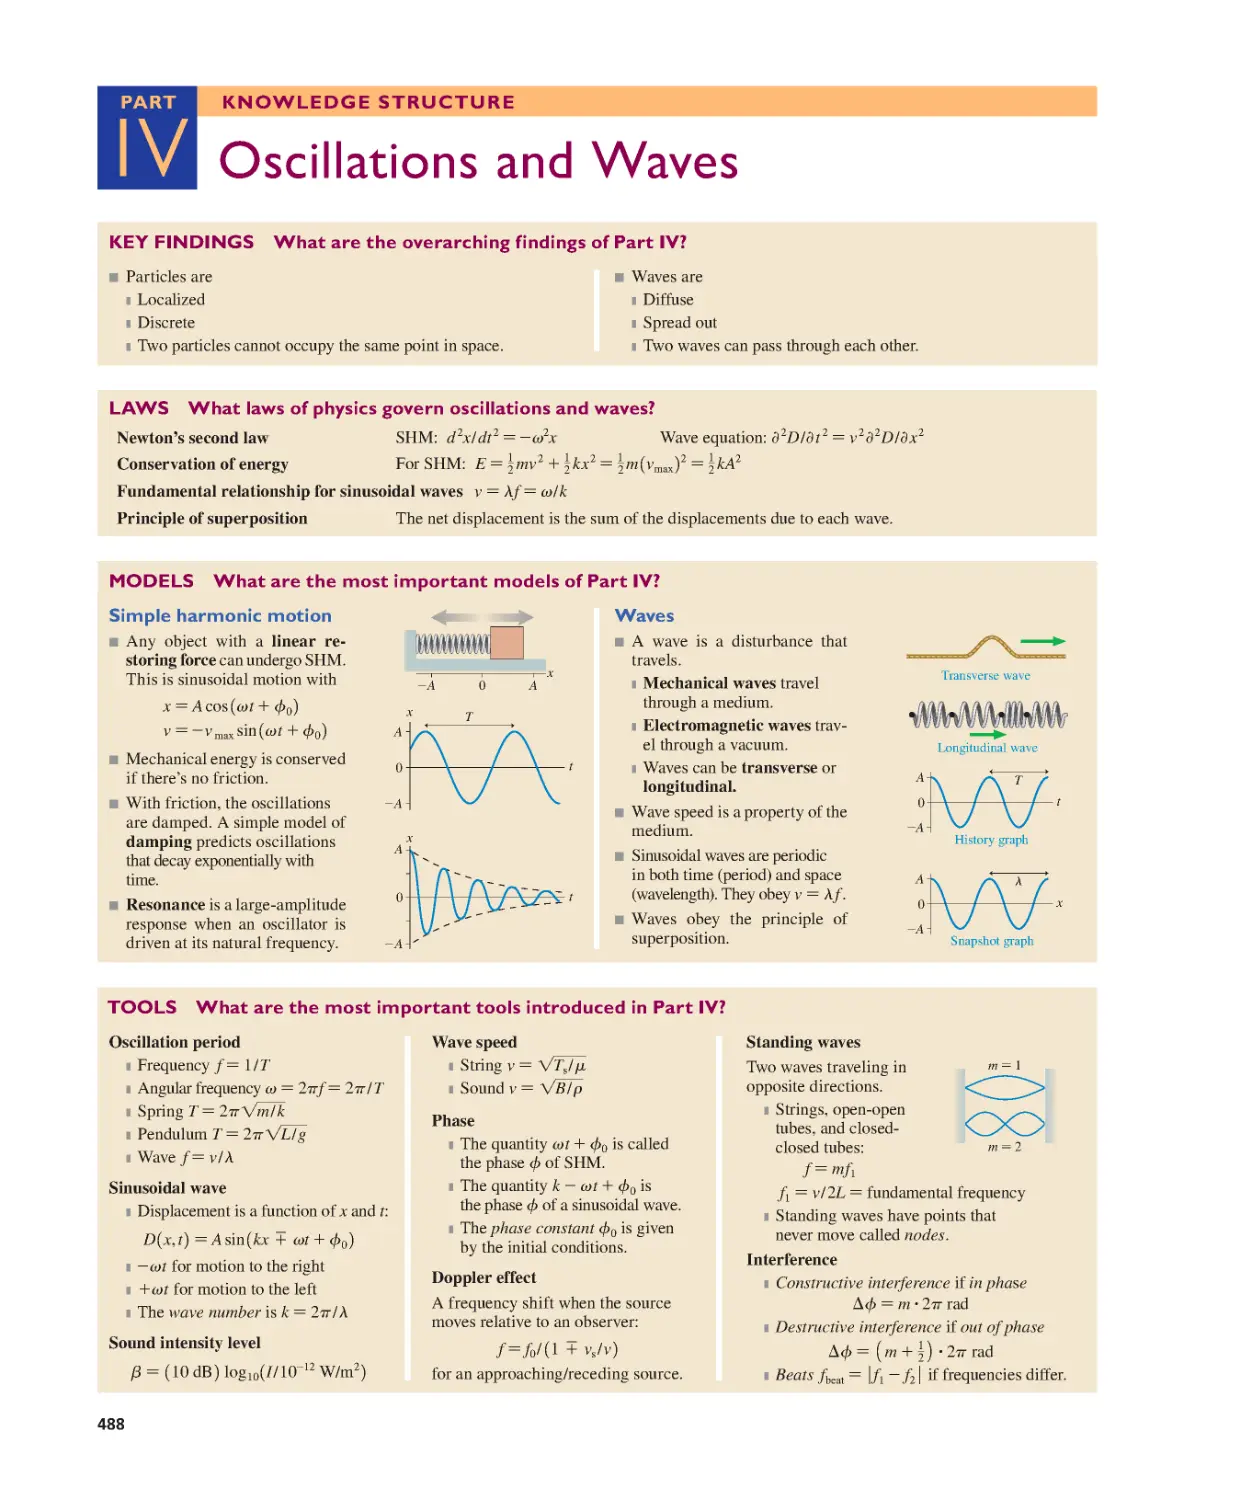 Part IV: Knowledge Structure: Oscillations and Waves